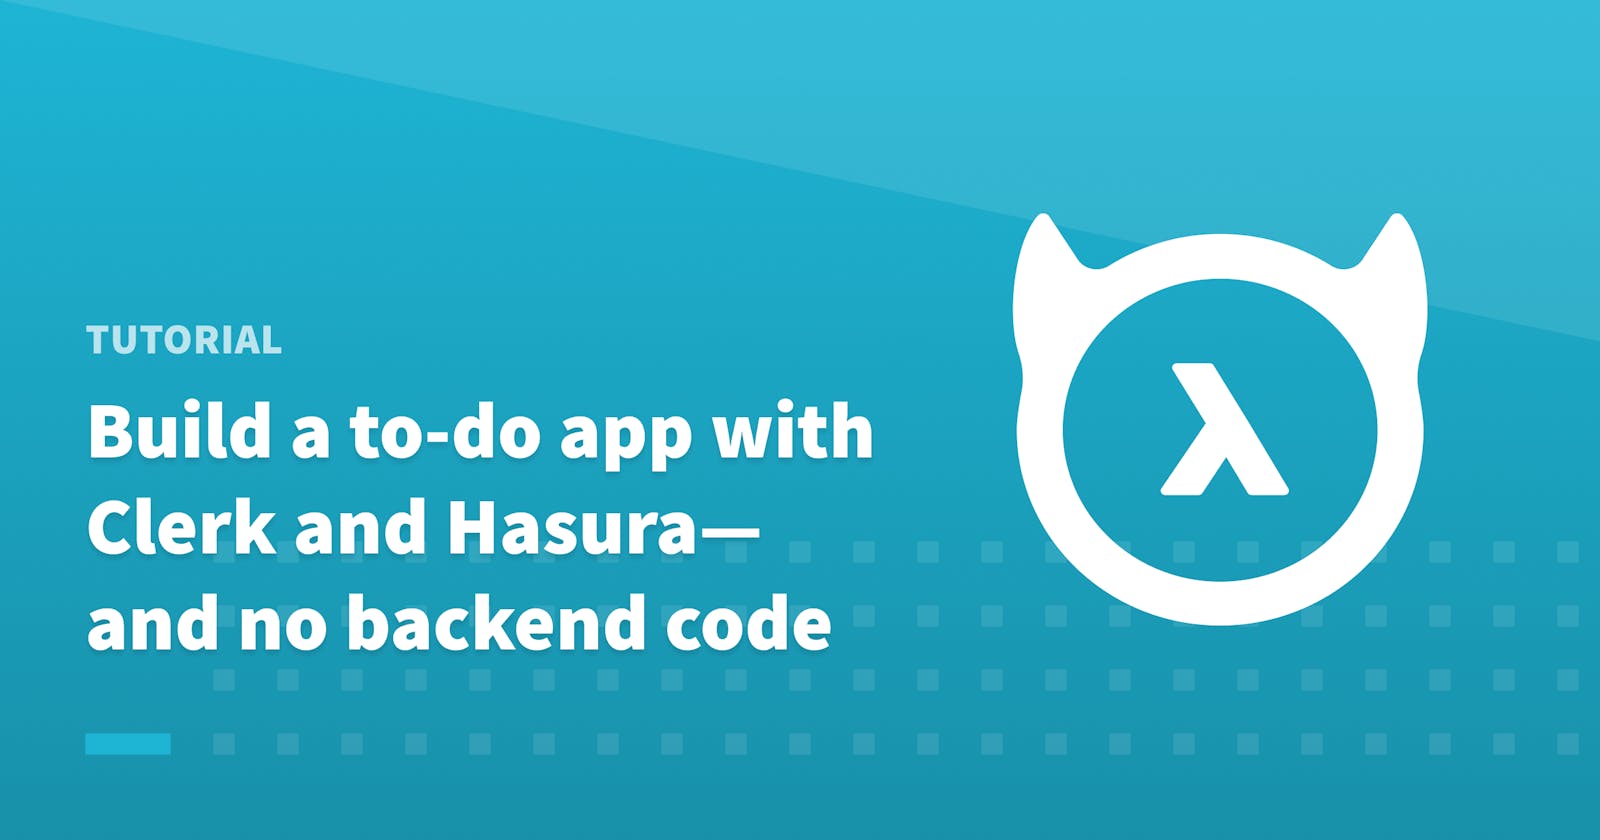 Build a Fullstack to-do app without any backend code